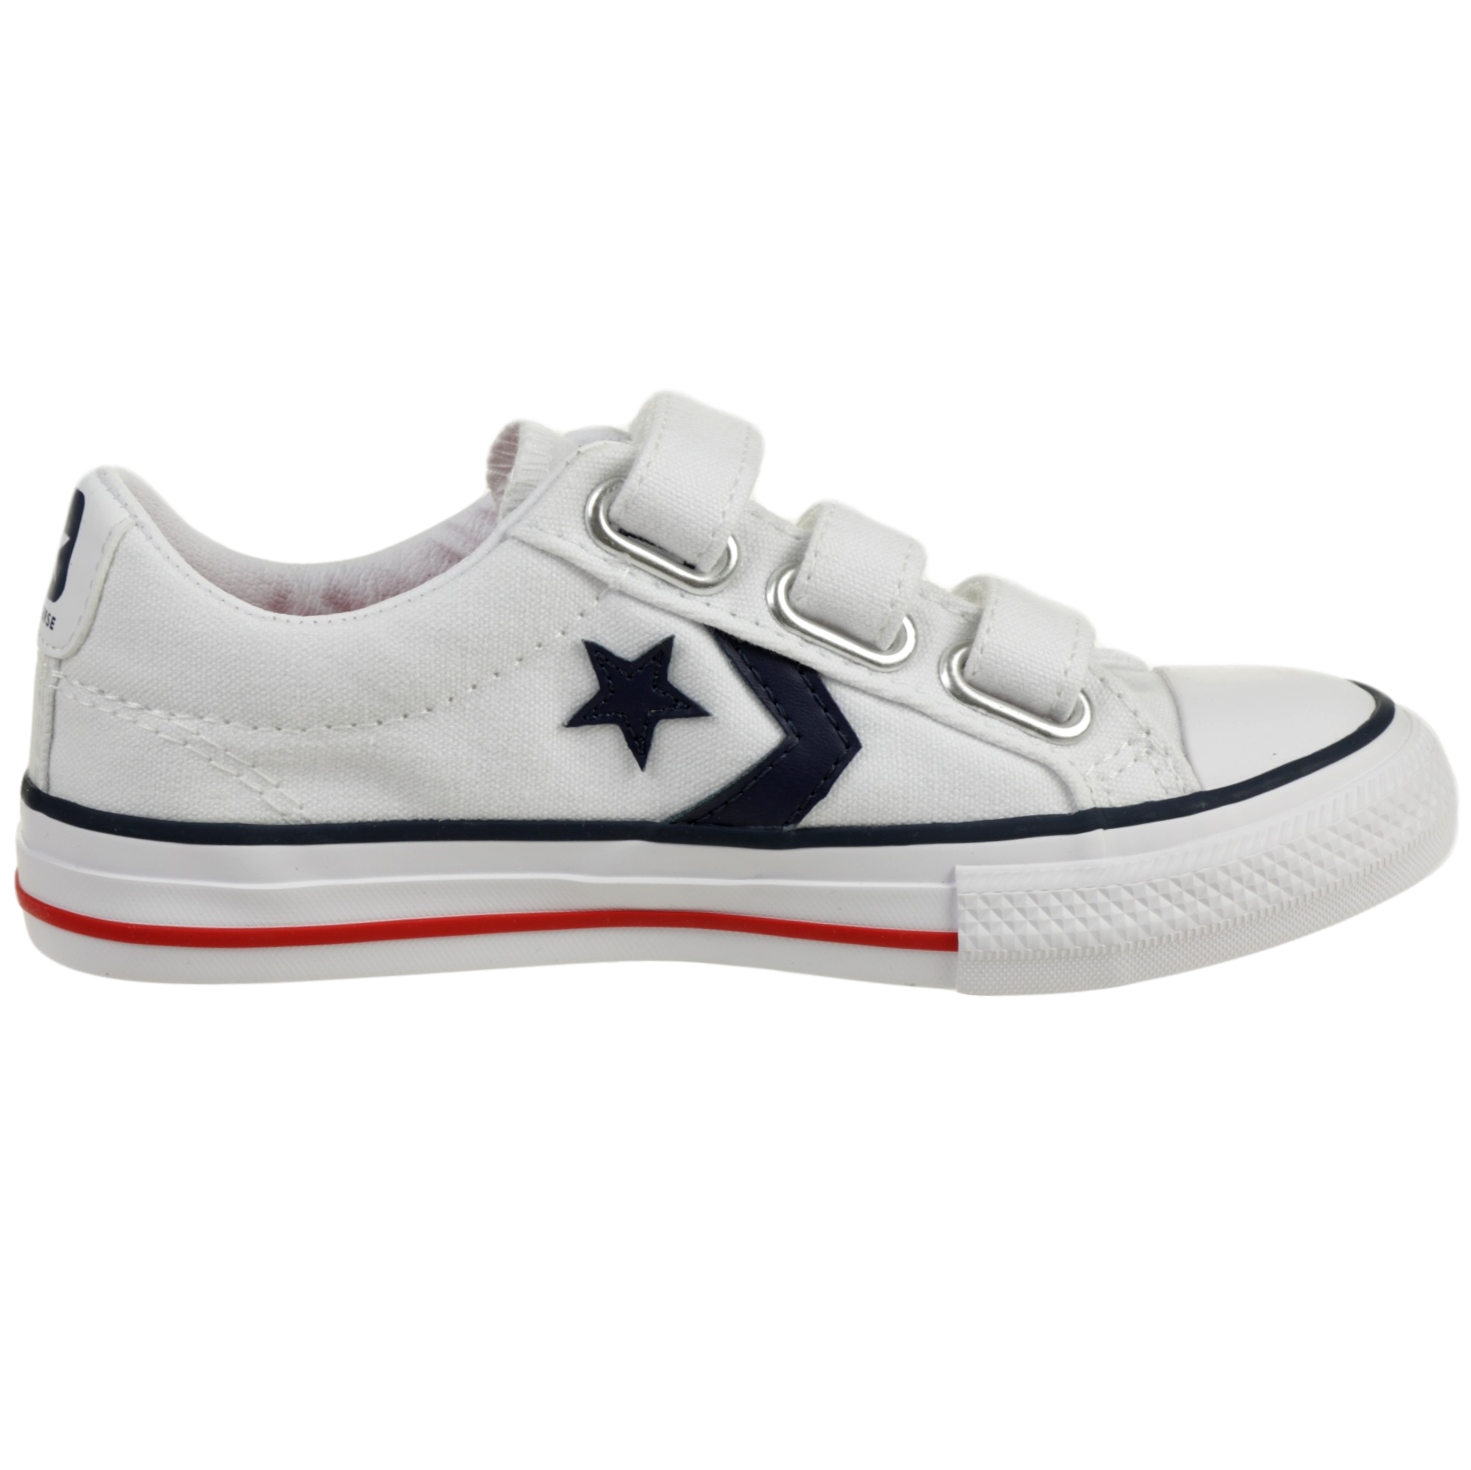 Converse CTAS 3V OX Easy-On Star Player Low Top Kinder Sneaker 315660 Weiß